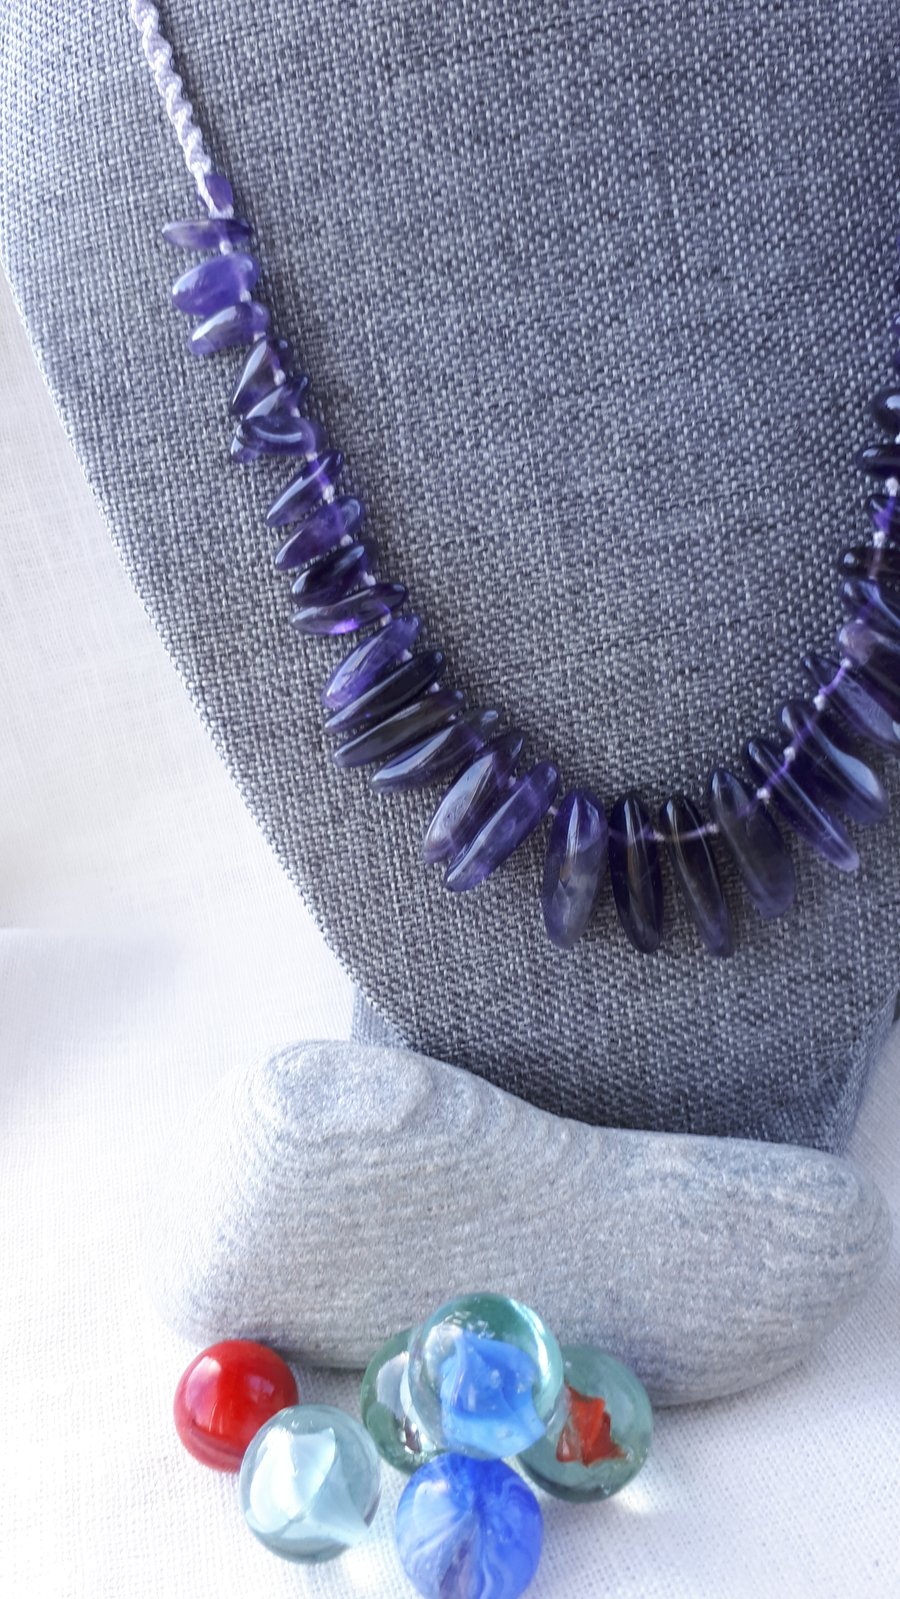 Amethyst bead necklace adjustable length with sliding knot 18 to 24 inches